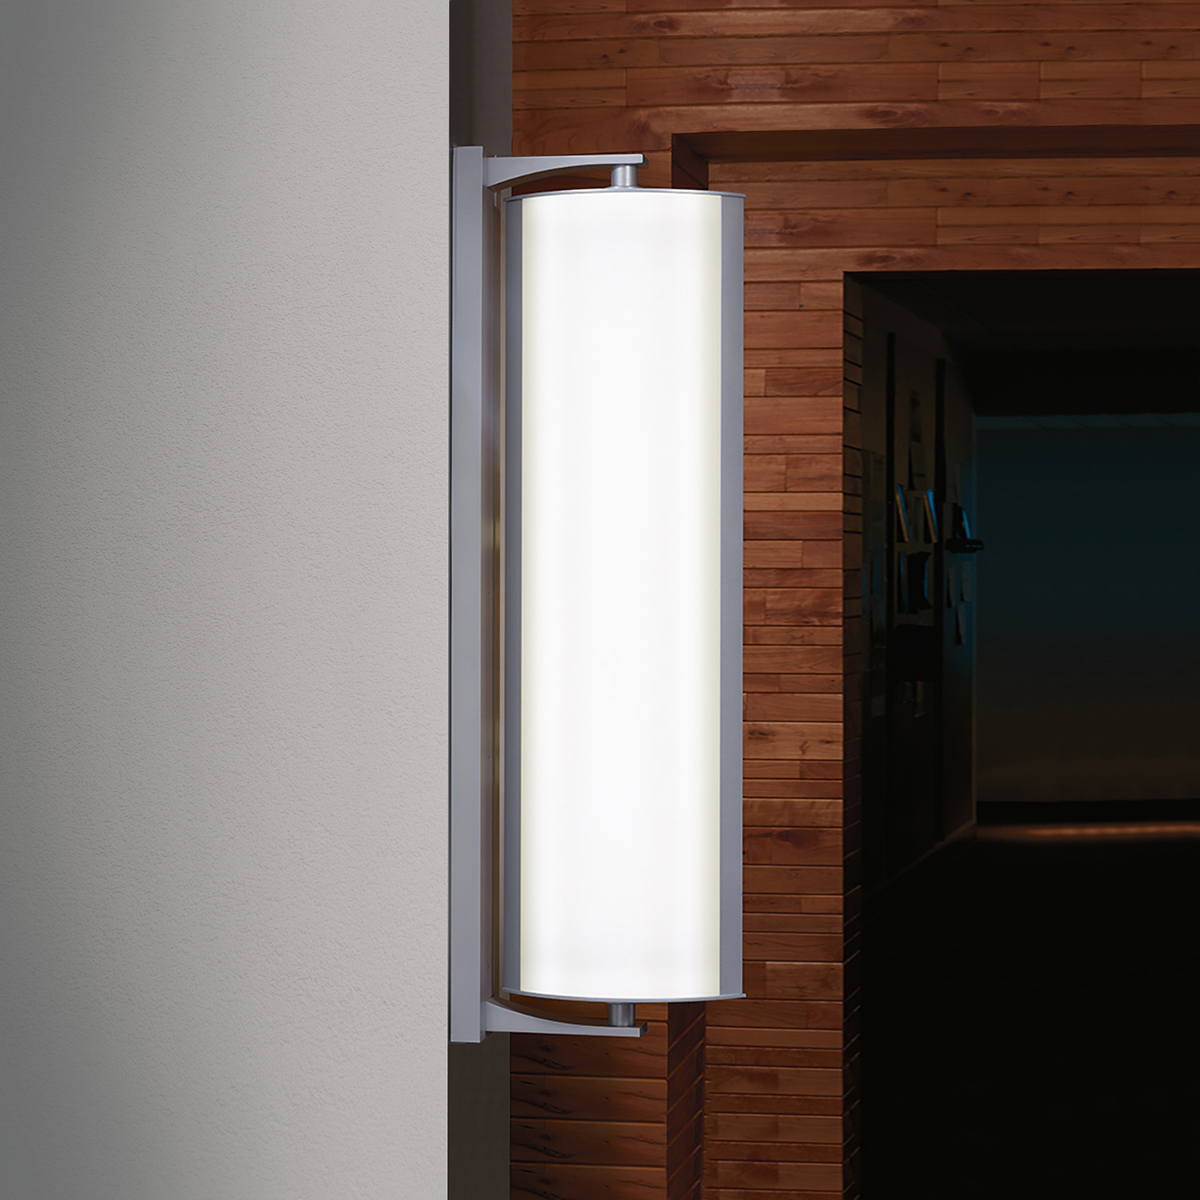 A large, rectangular luminaire that mounts closely to the wall with a top and bottom bracket